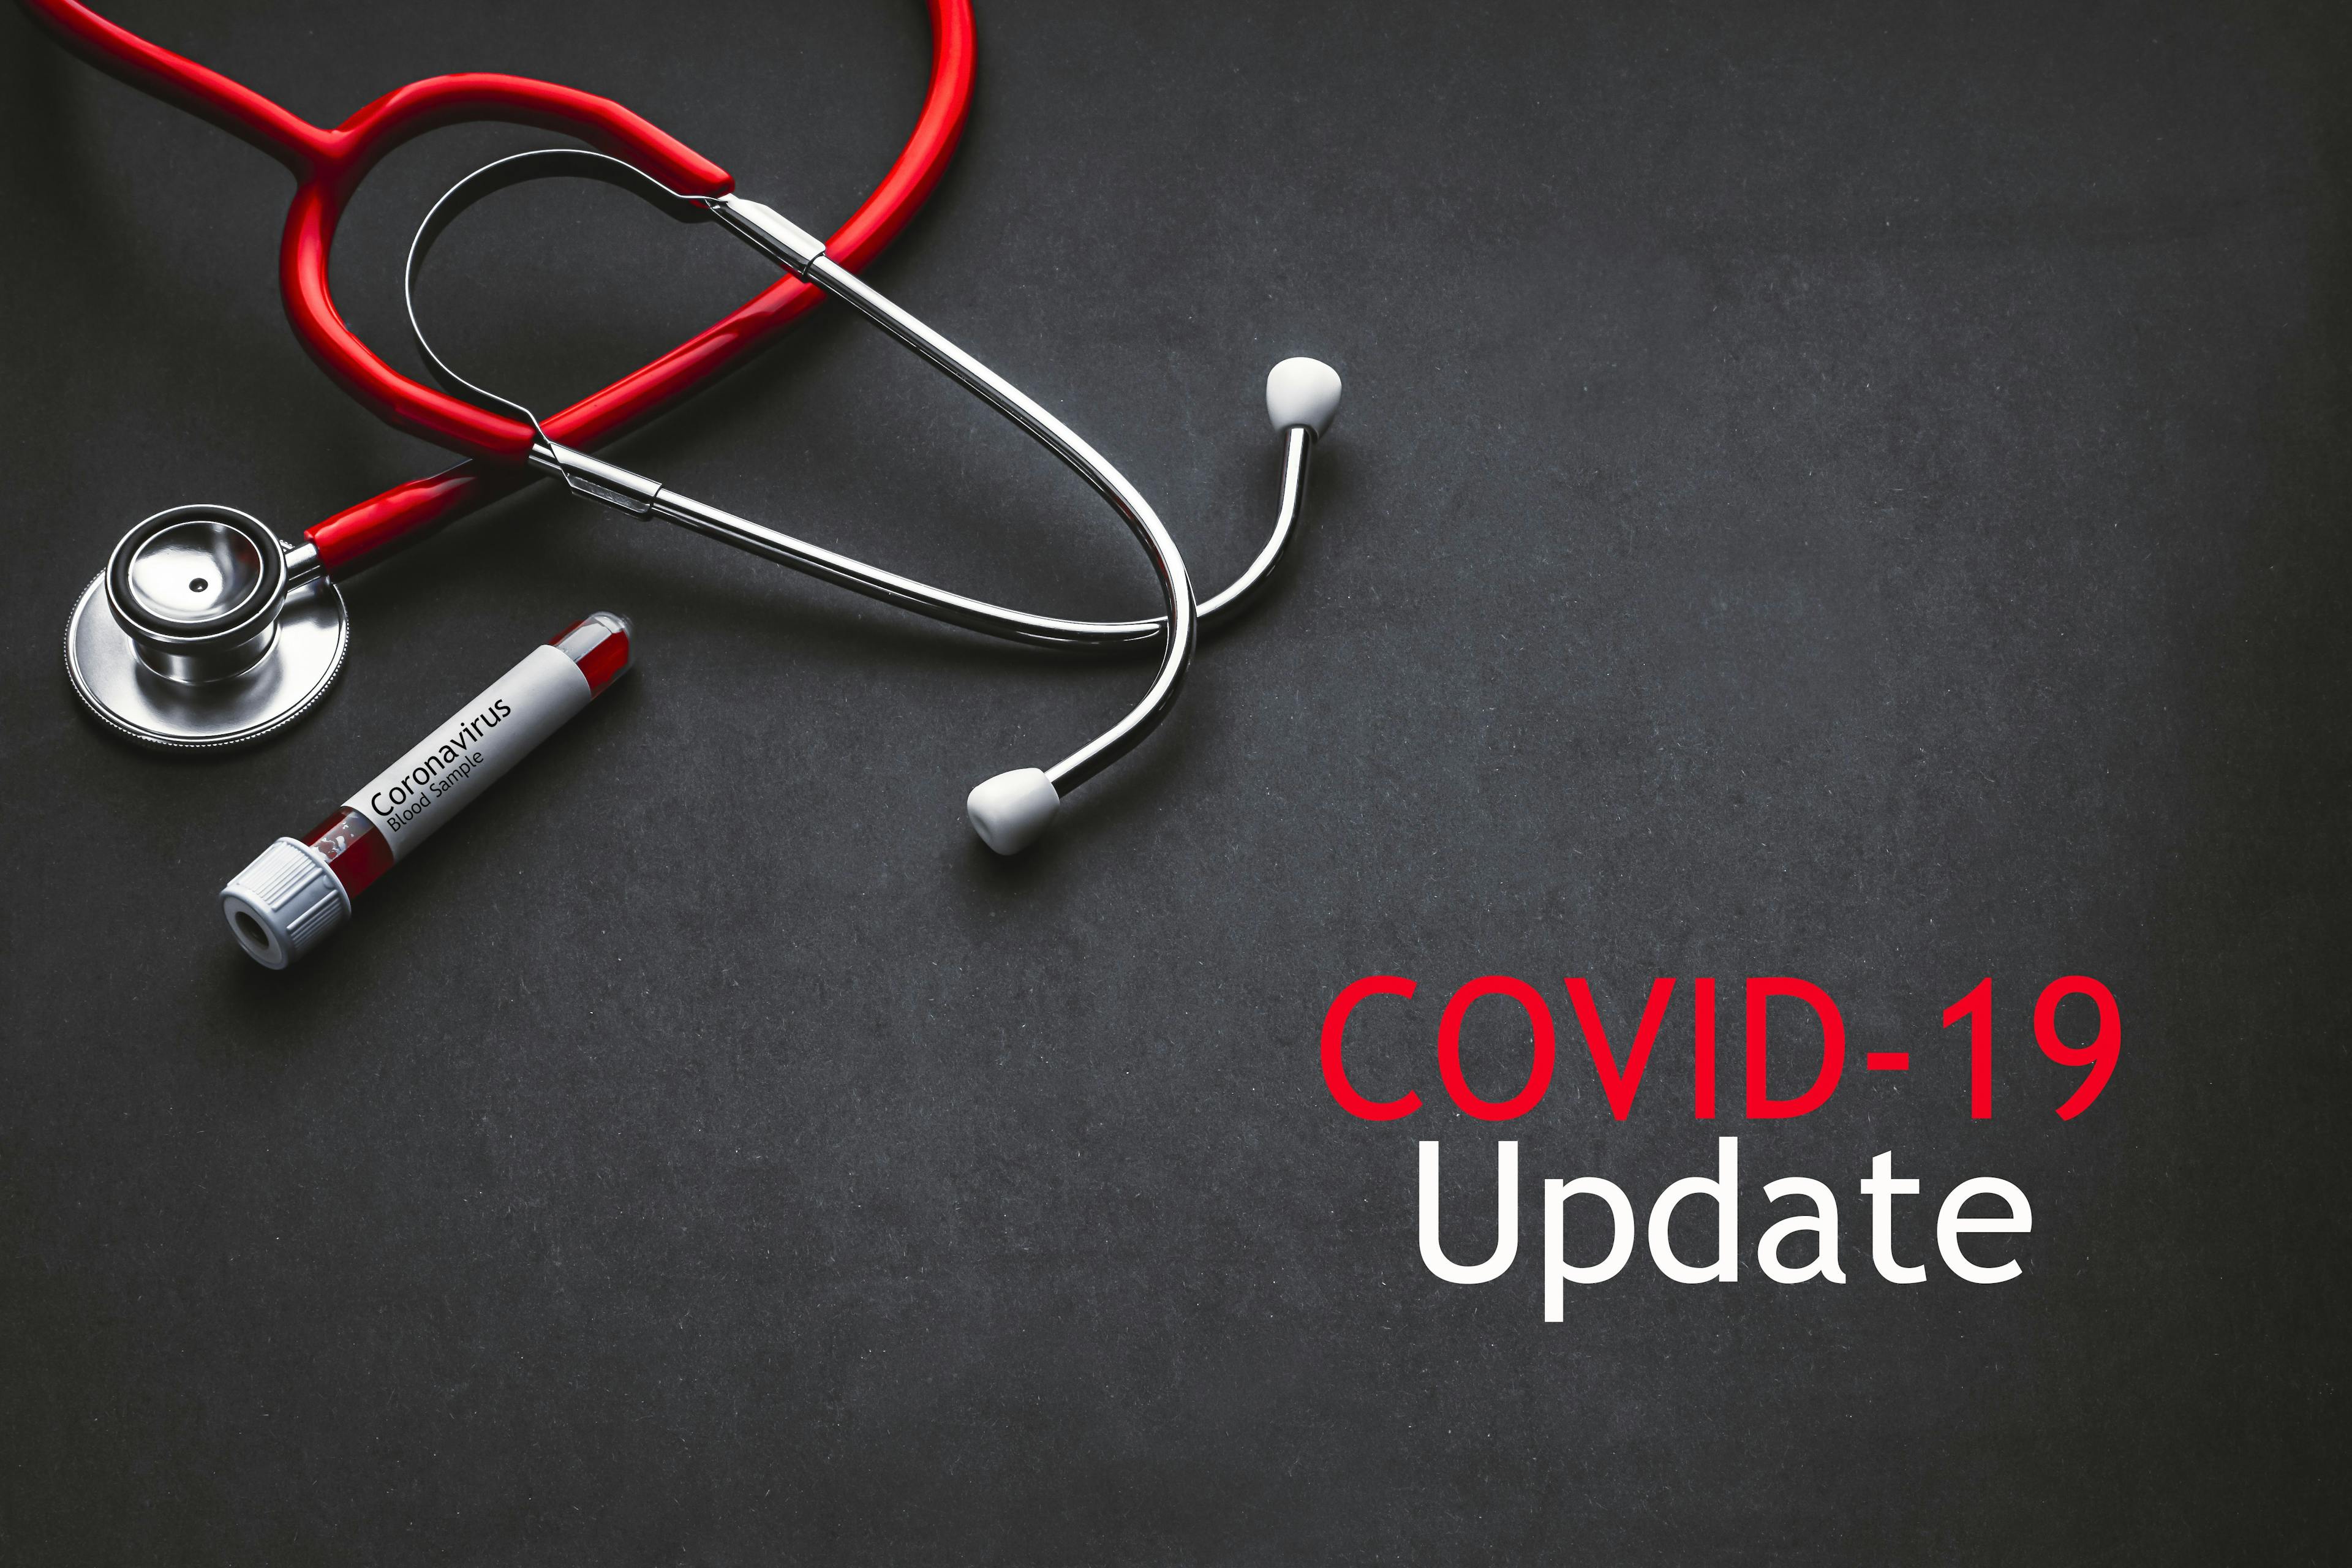 COVID-19 Update: Global Cases and Recoveries as of May 22, 2020